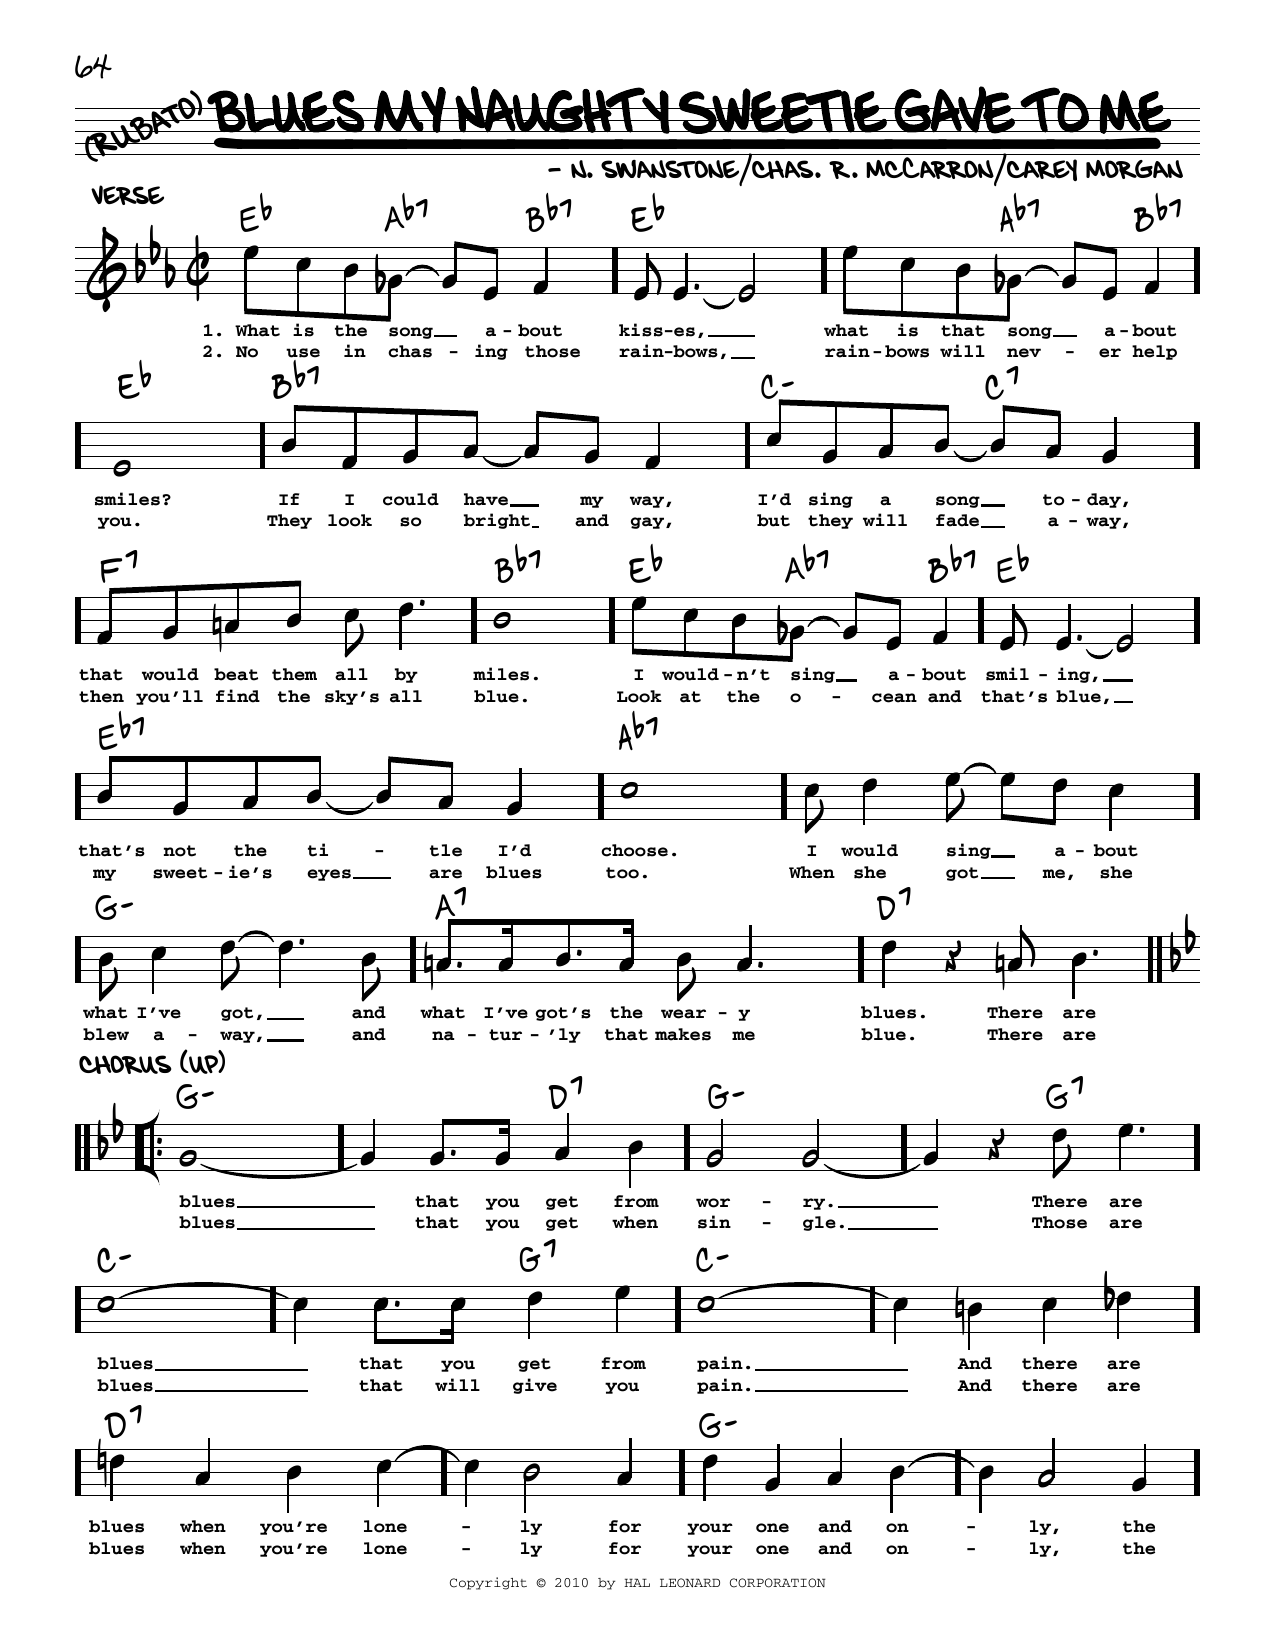 Download Carey Morgan Blues My Naughty Sweetie Gave To Me (ar Sheet Music